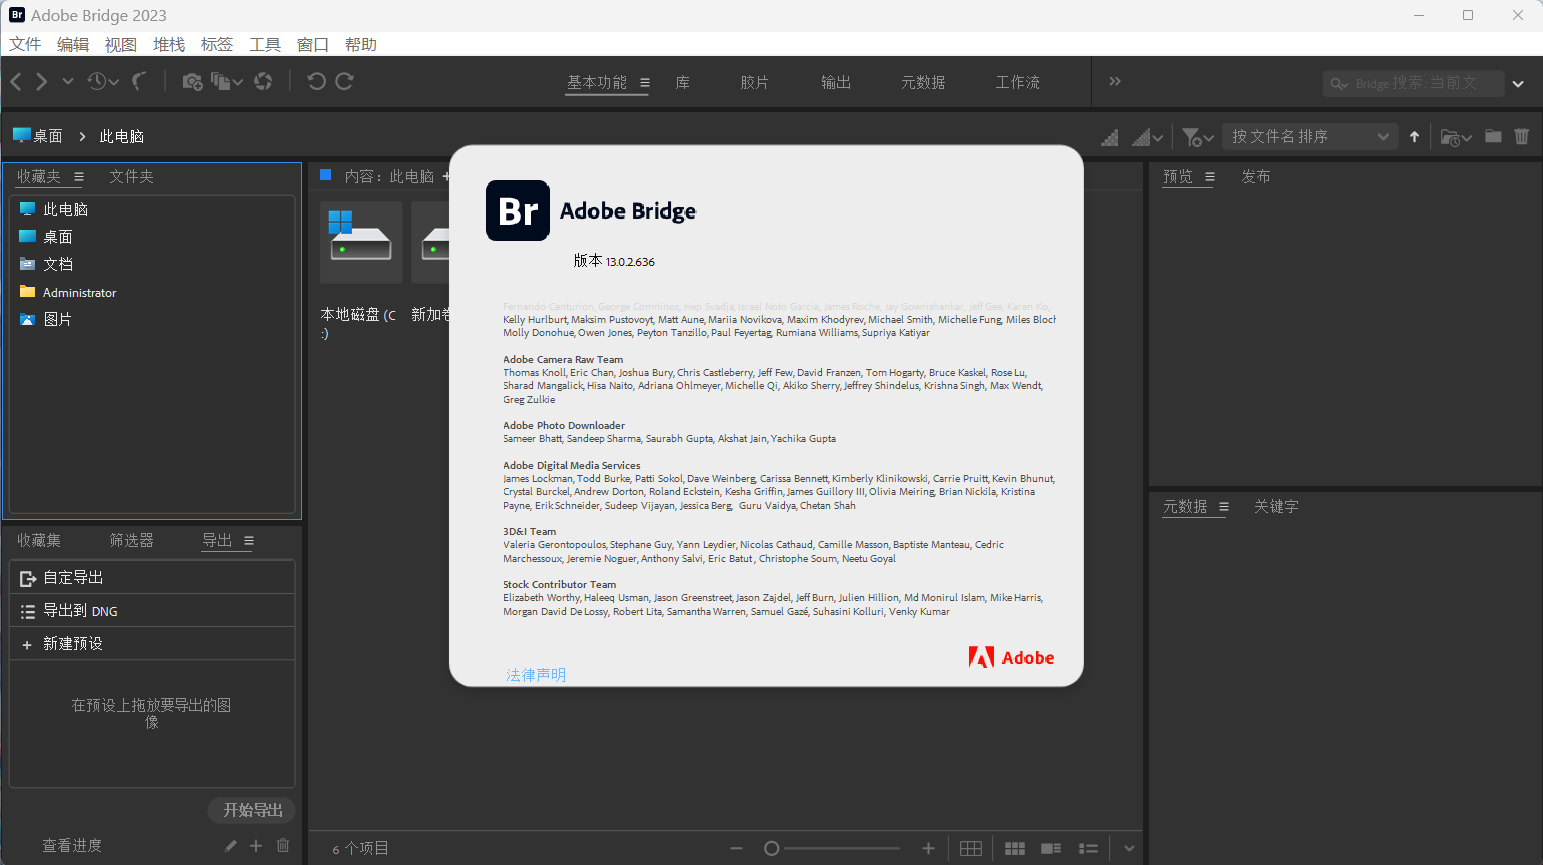 download the new for android Adobe Bridge 2023 v13.0.4.755